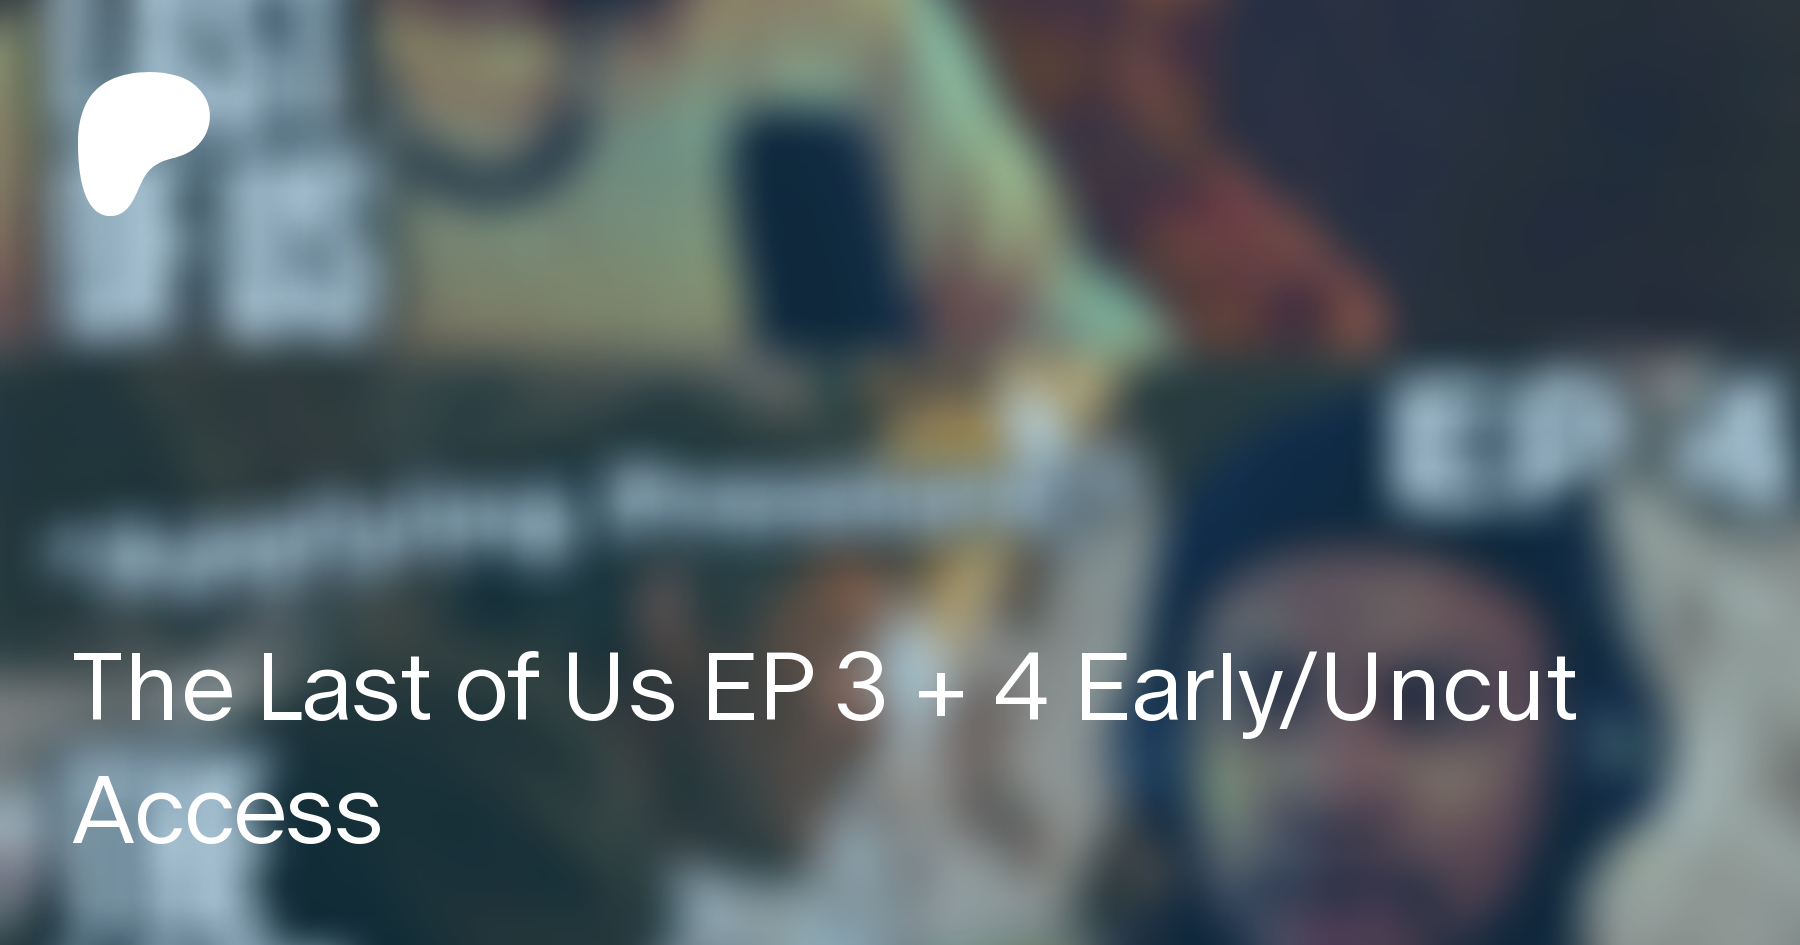 The Last of Us EP 3 + 4 Early/Uncut Access